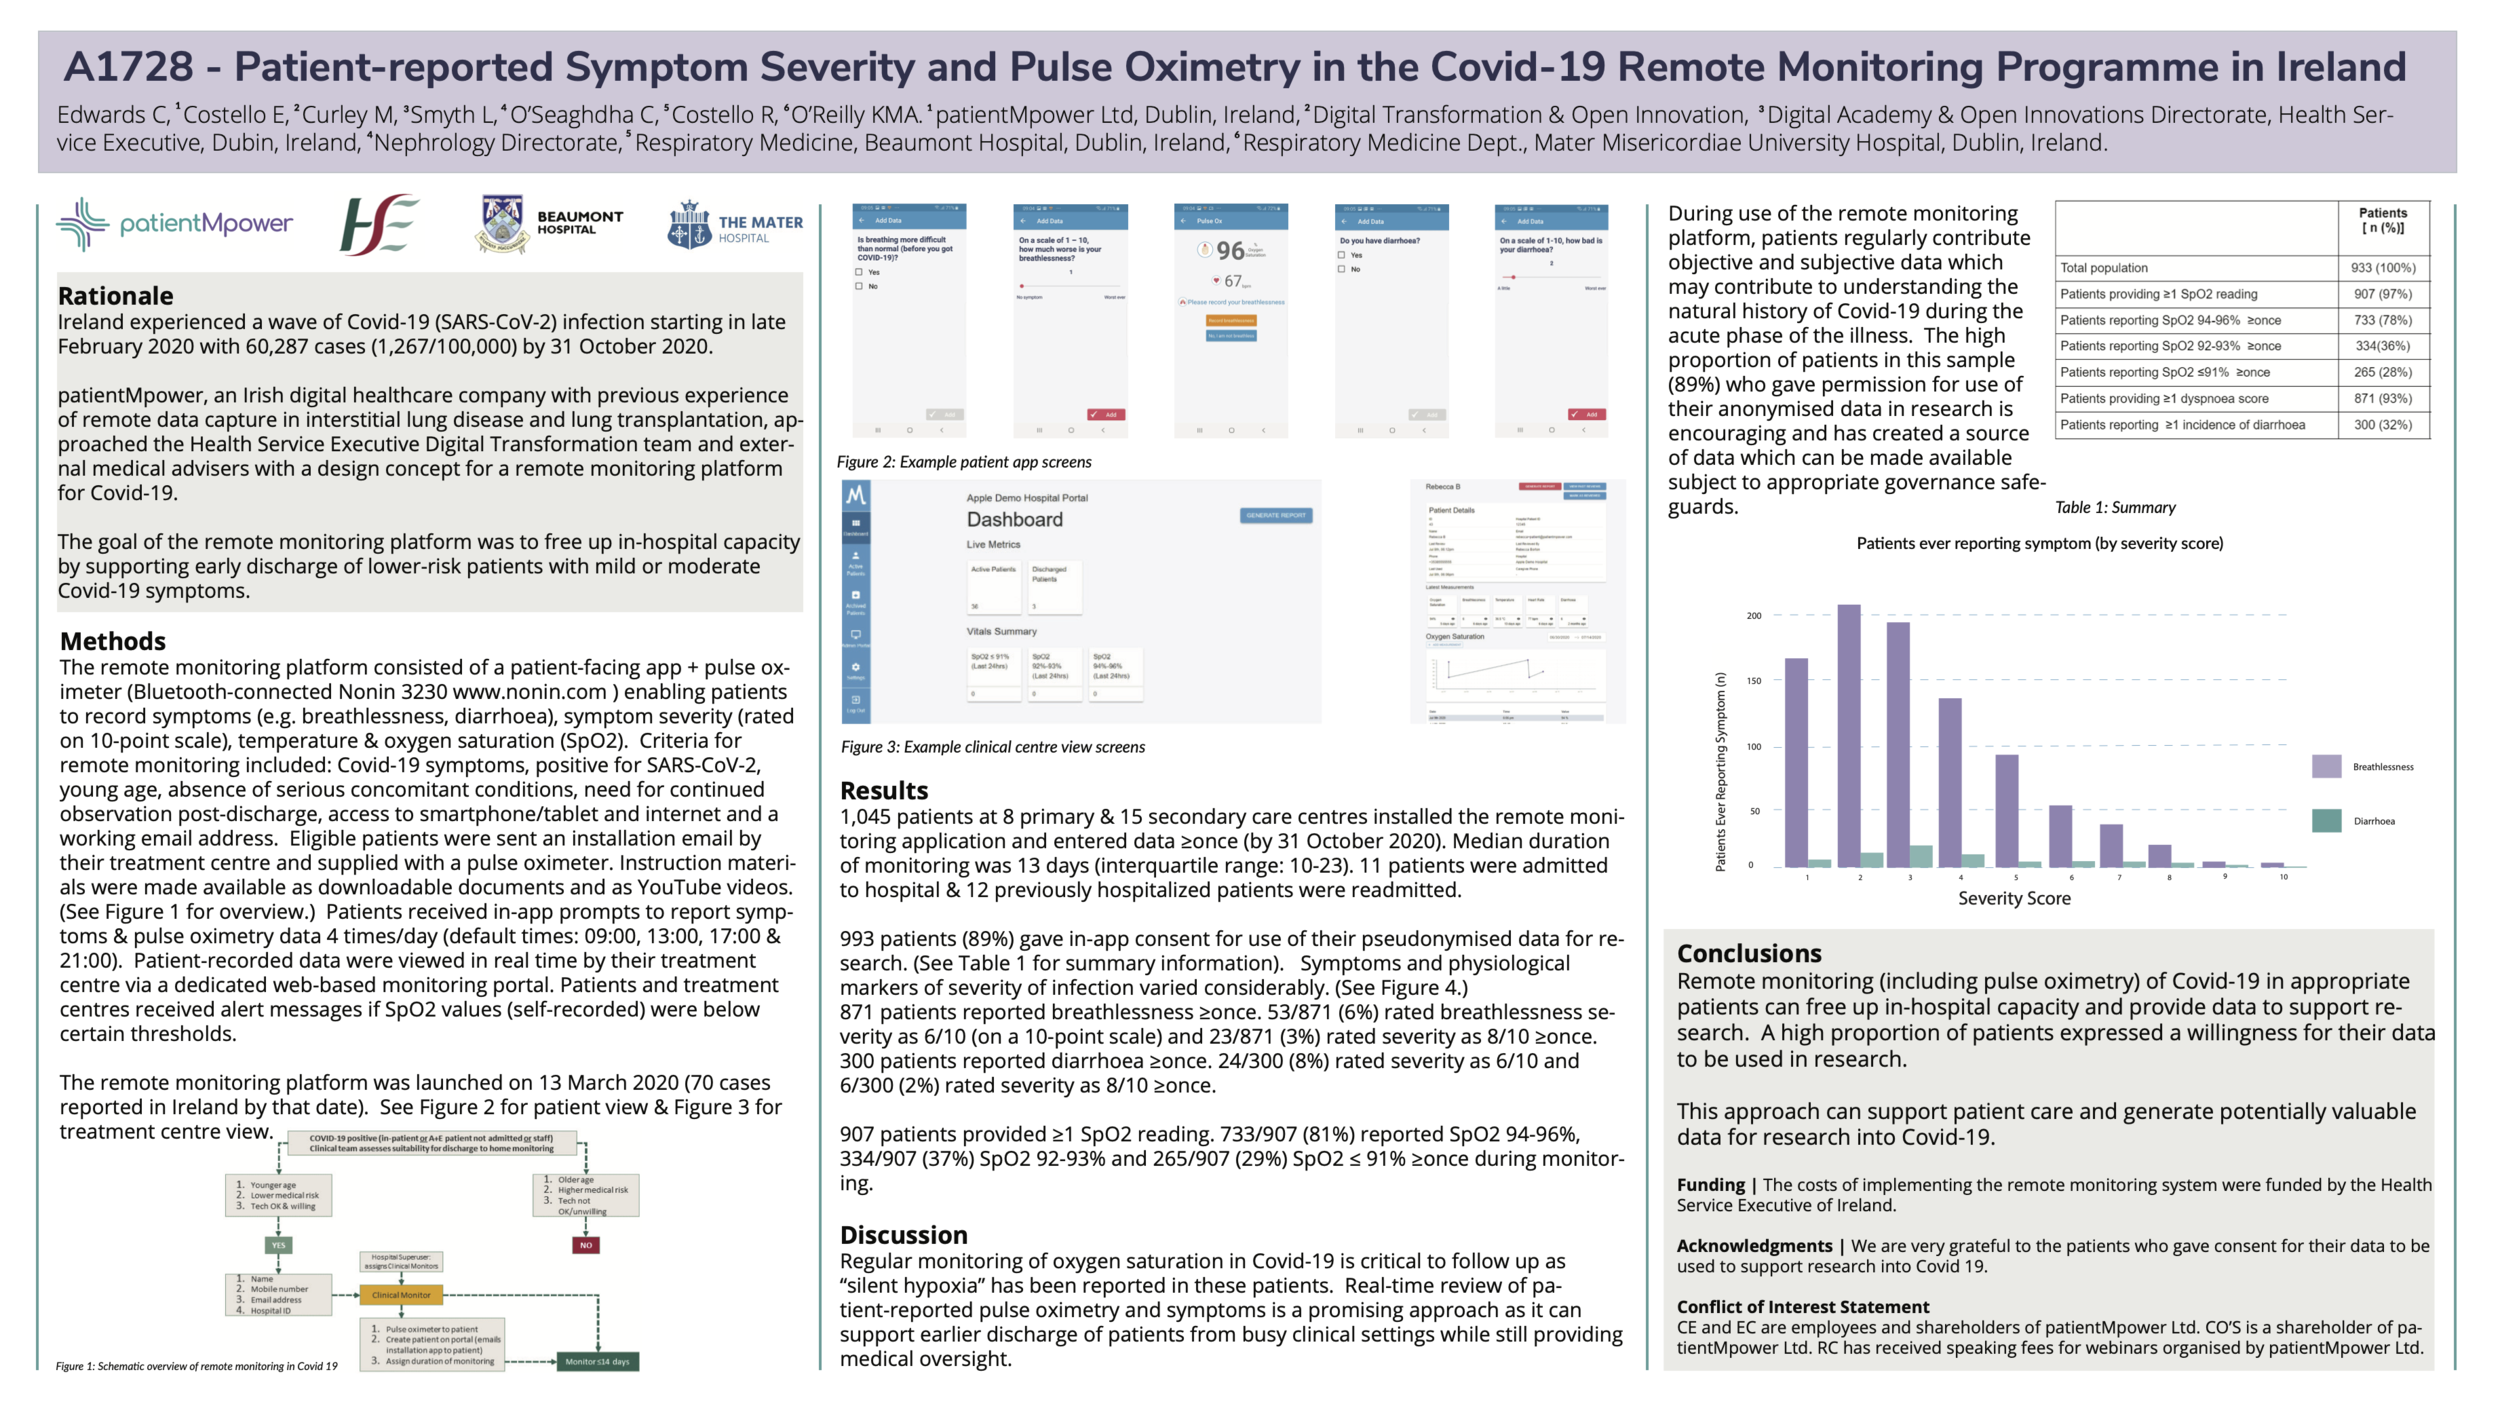 A1728 - Patient-reported Symptom Severity and Pulse Oximetry in the Covid-19 Remote Monitoring Programme in Ireland